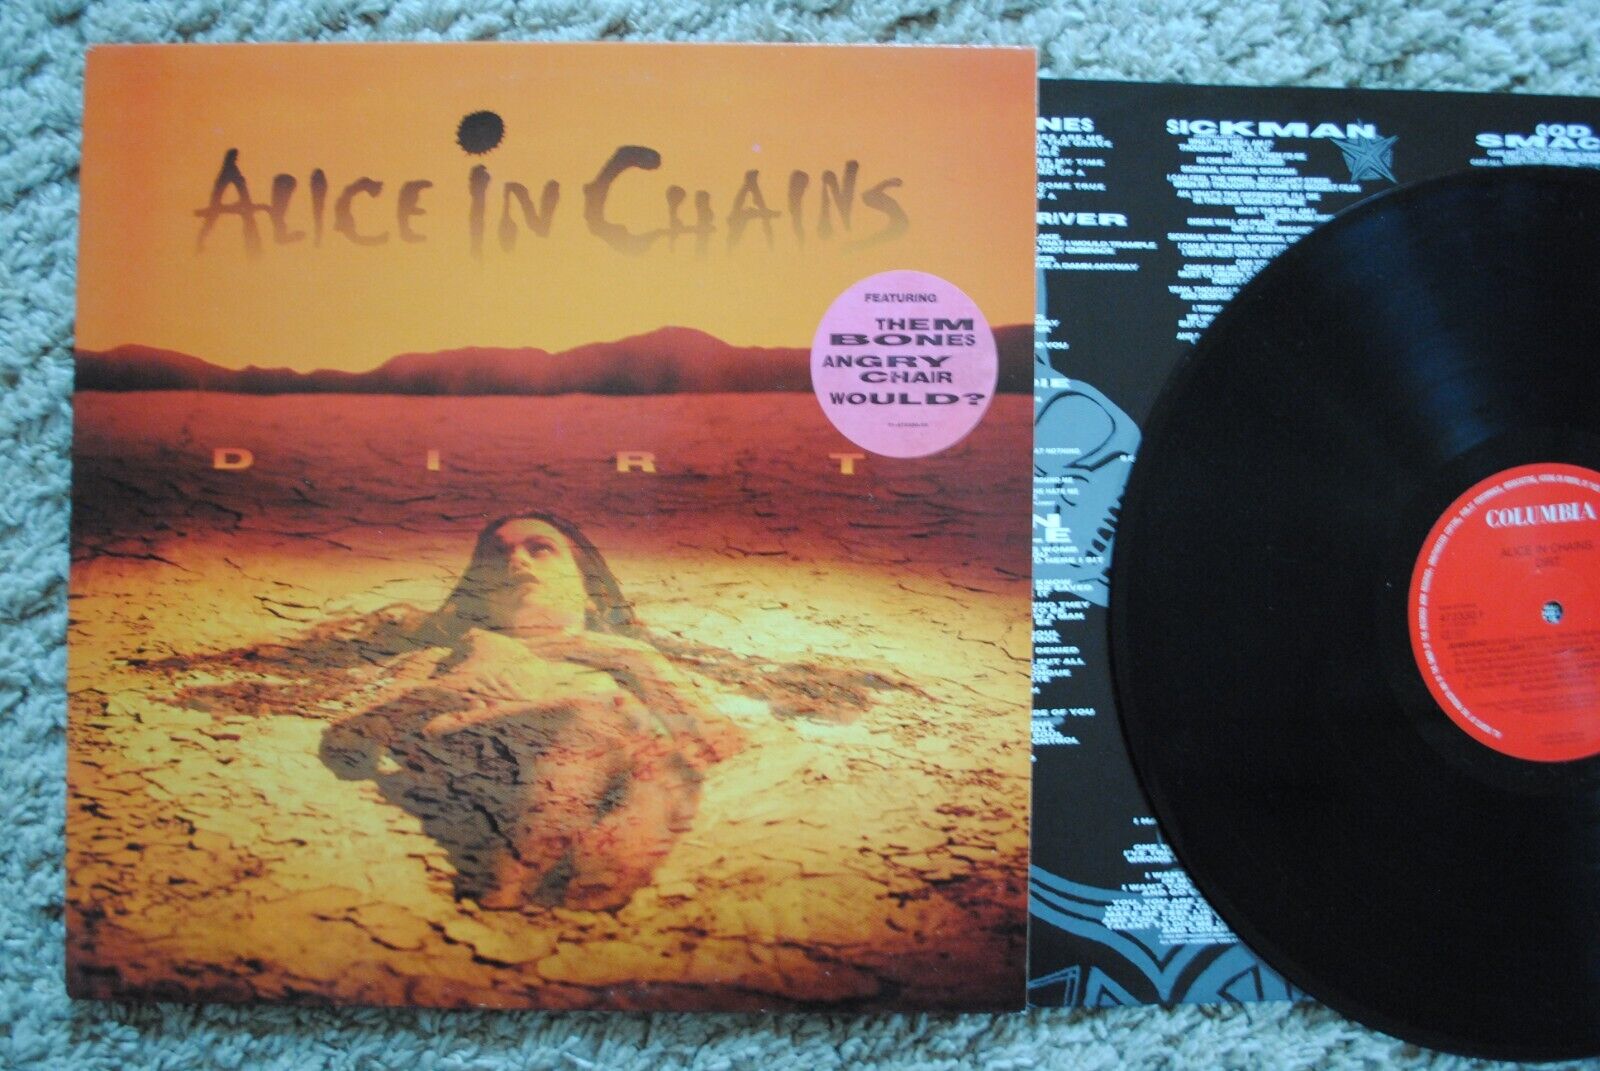 1-x-vinyl-first-press-alice-in-chains-dirt-hype-sticker-sony-1992-pearl-jam